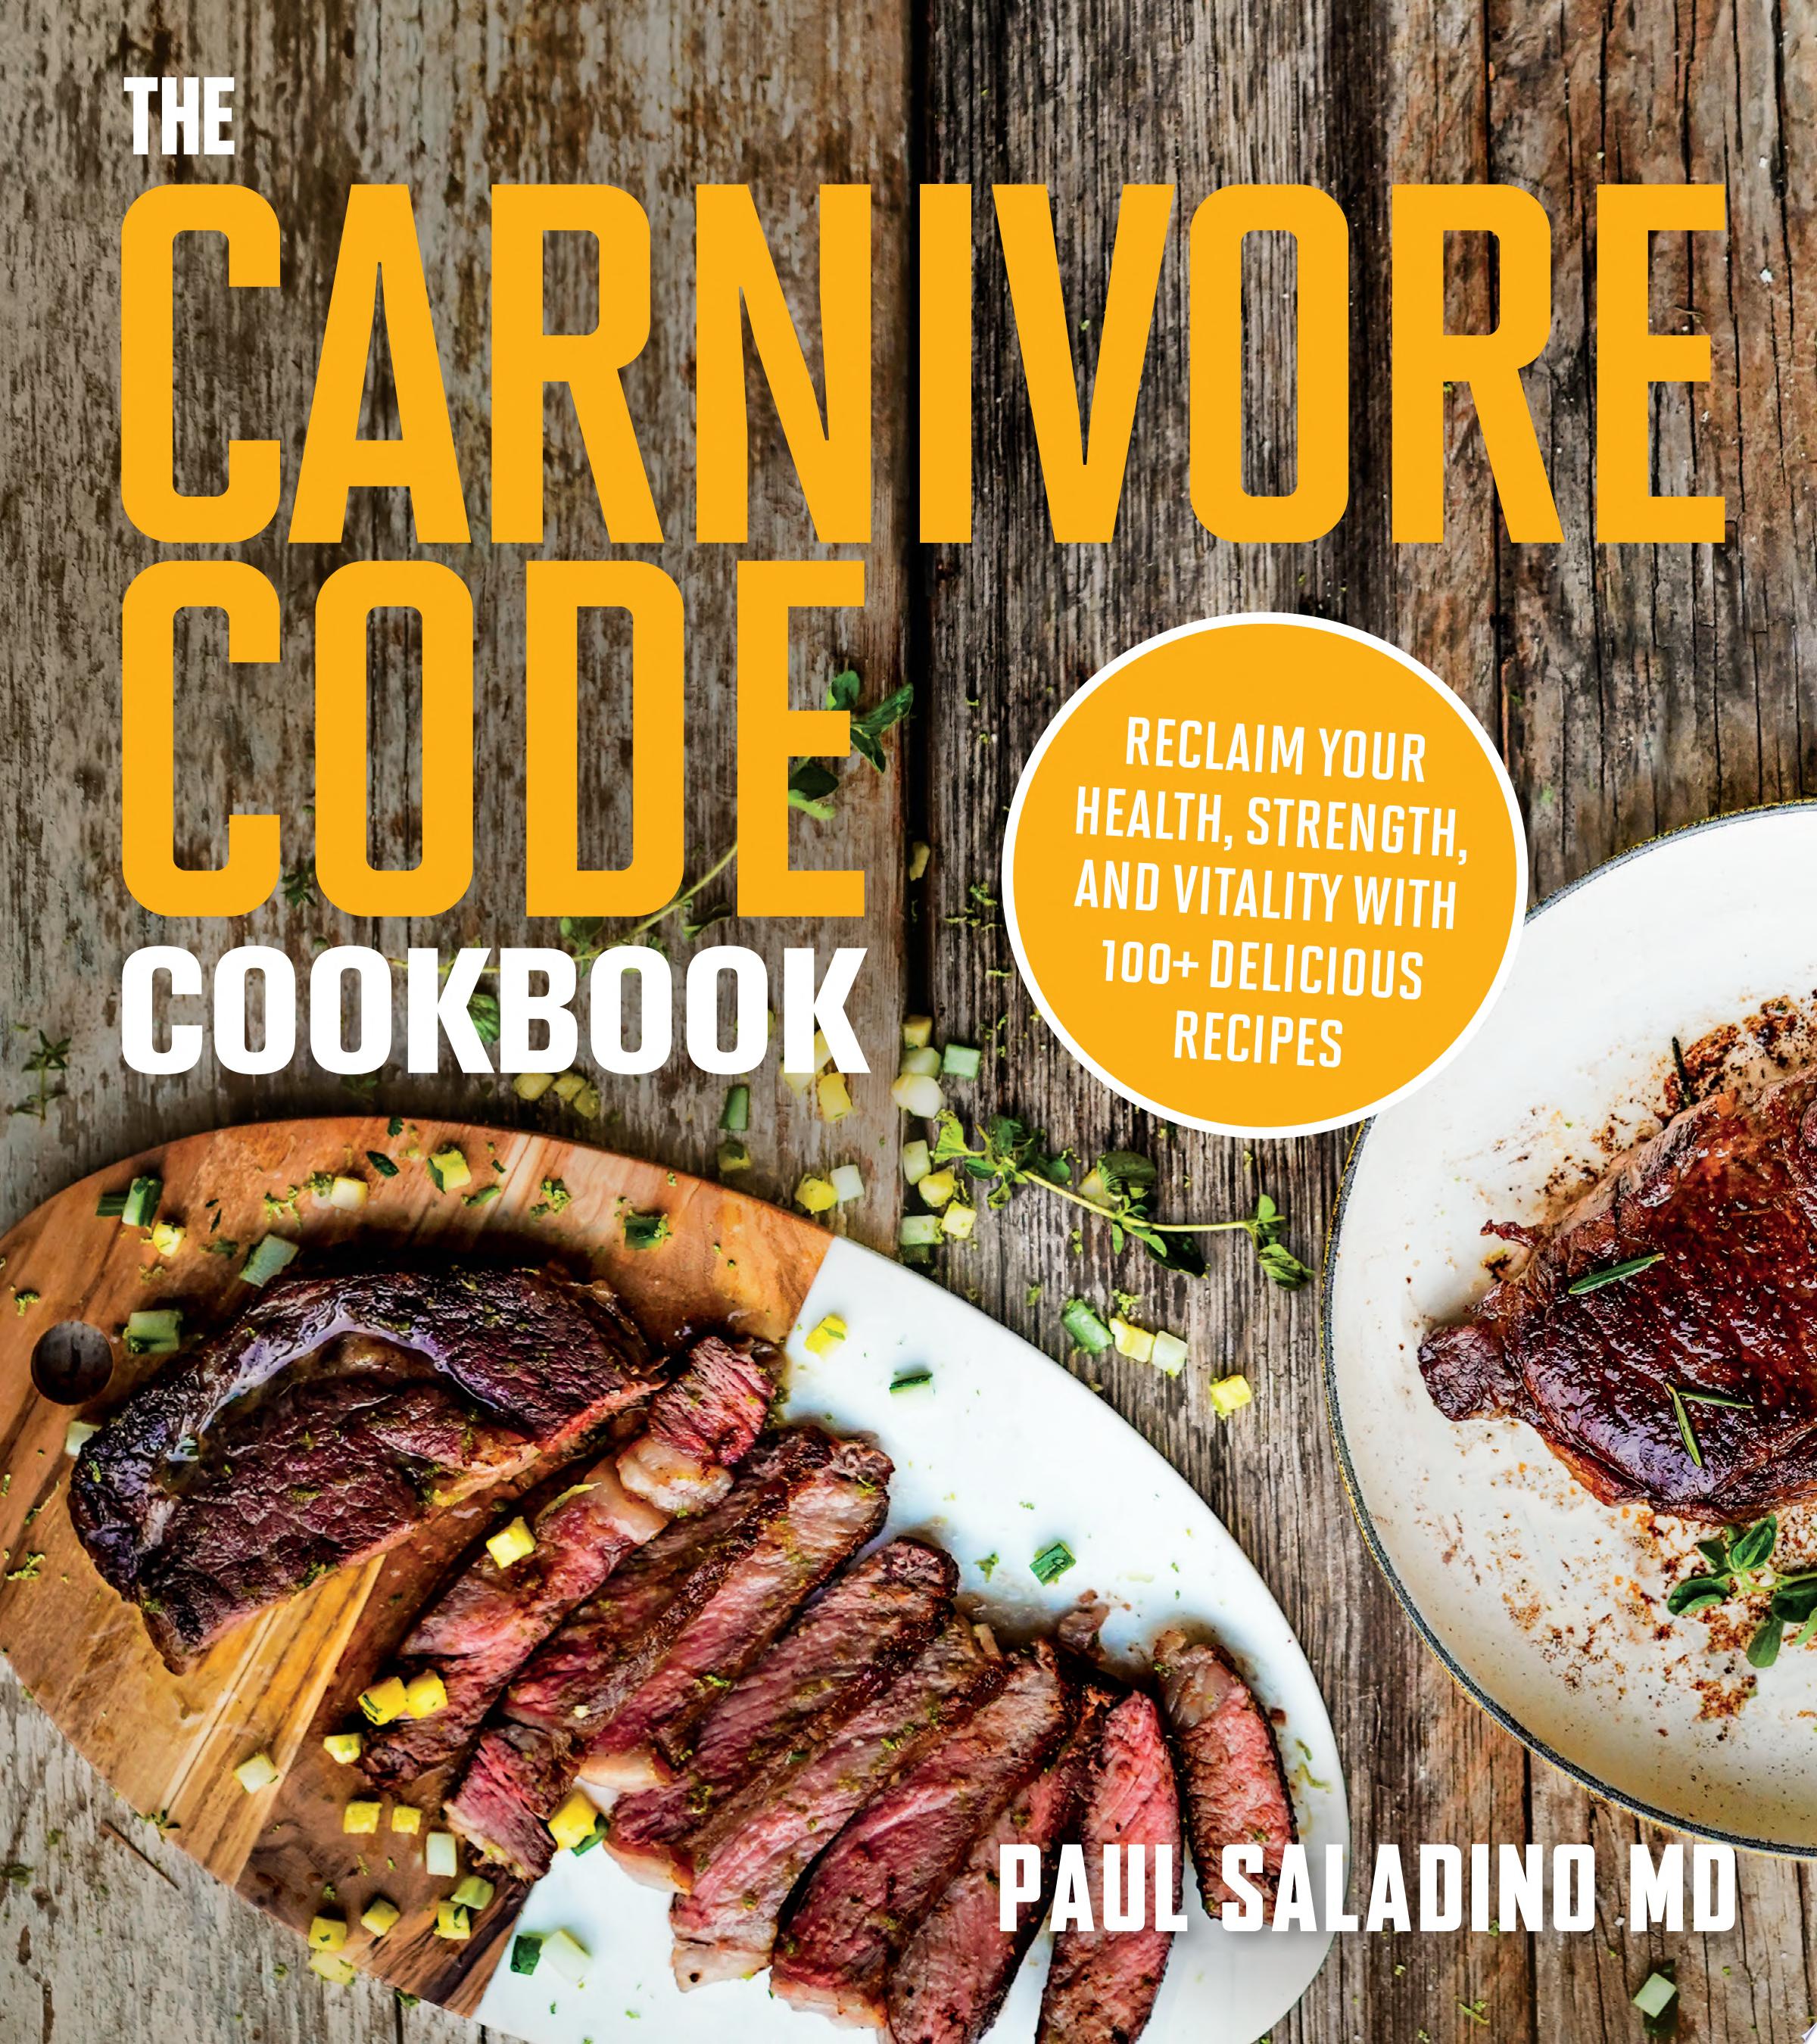 Image for "The Carnivore Code Cookbook"